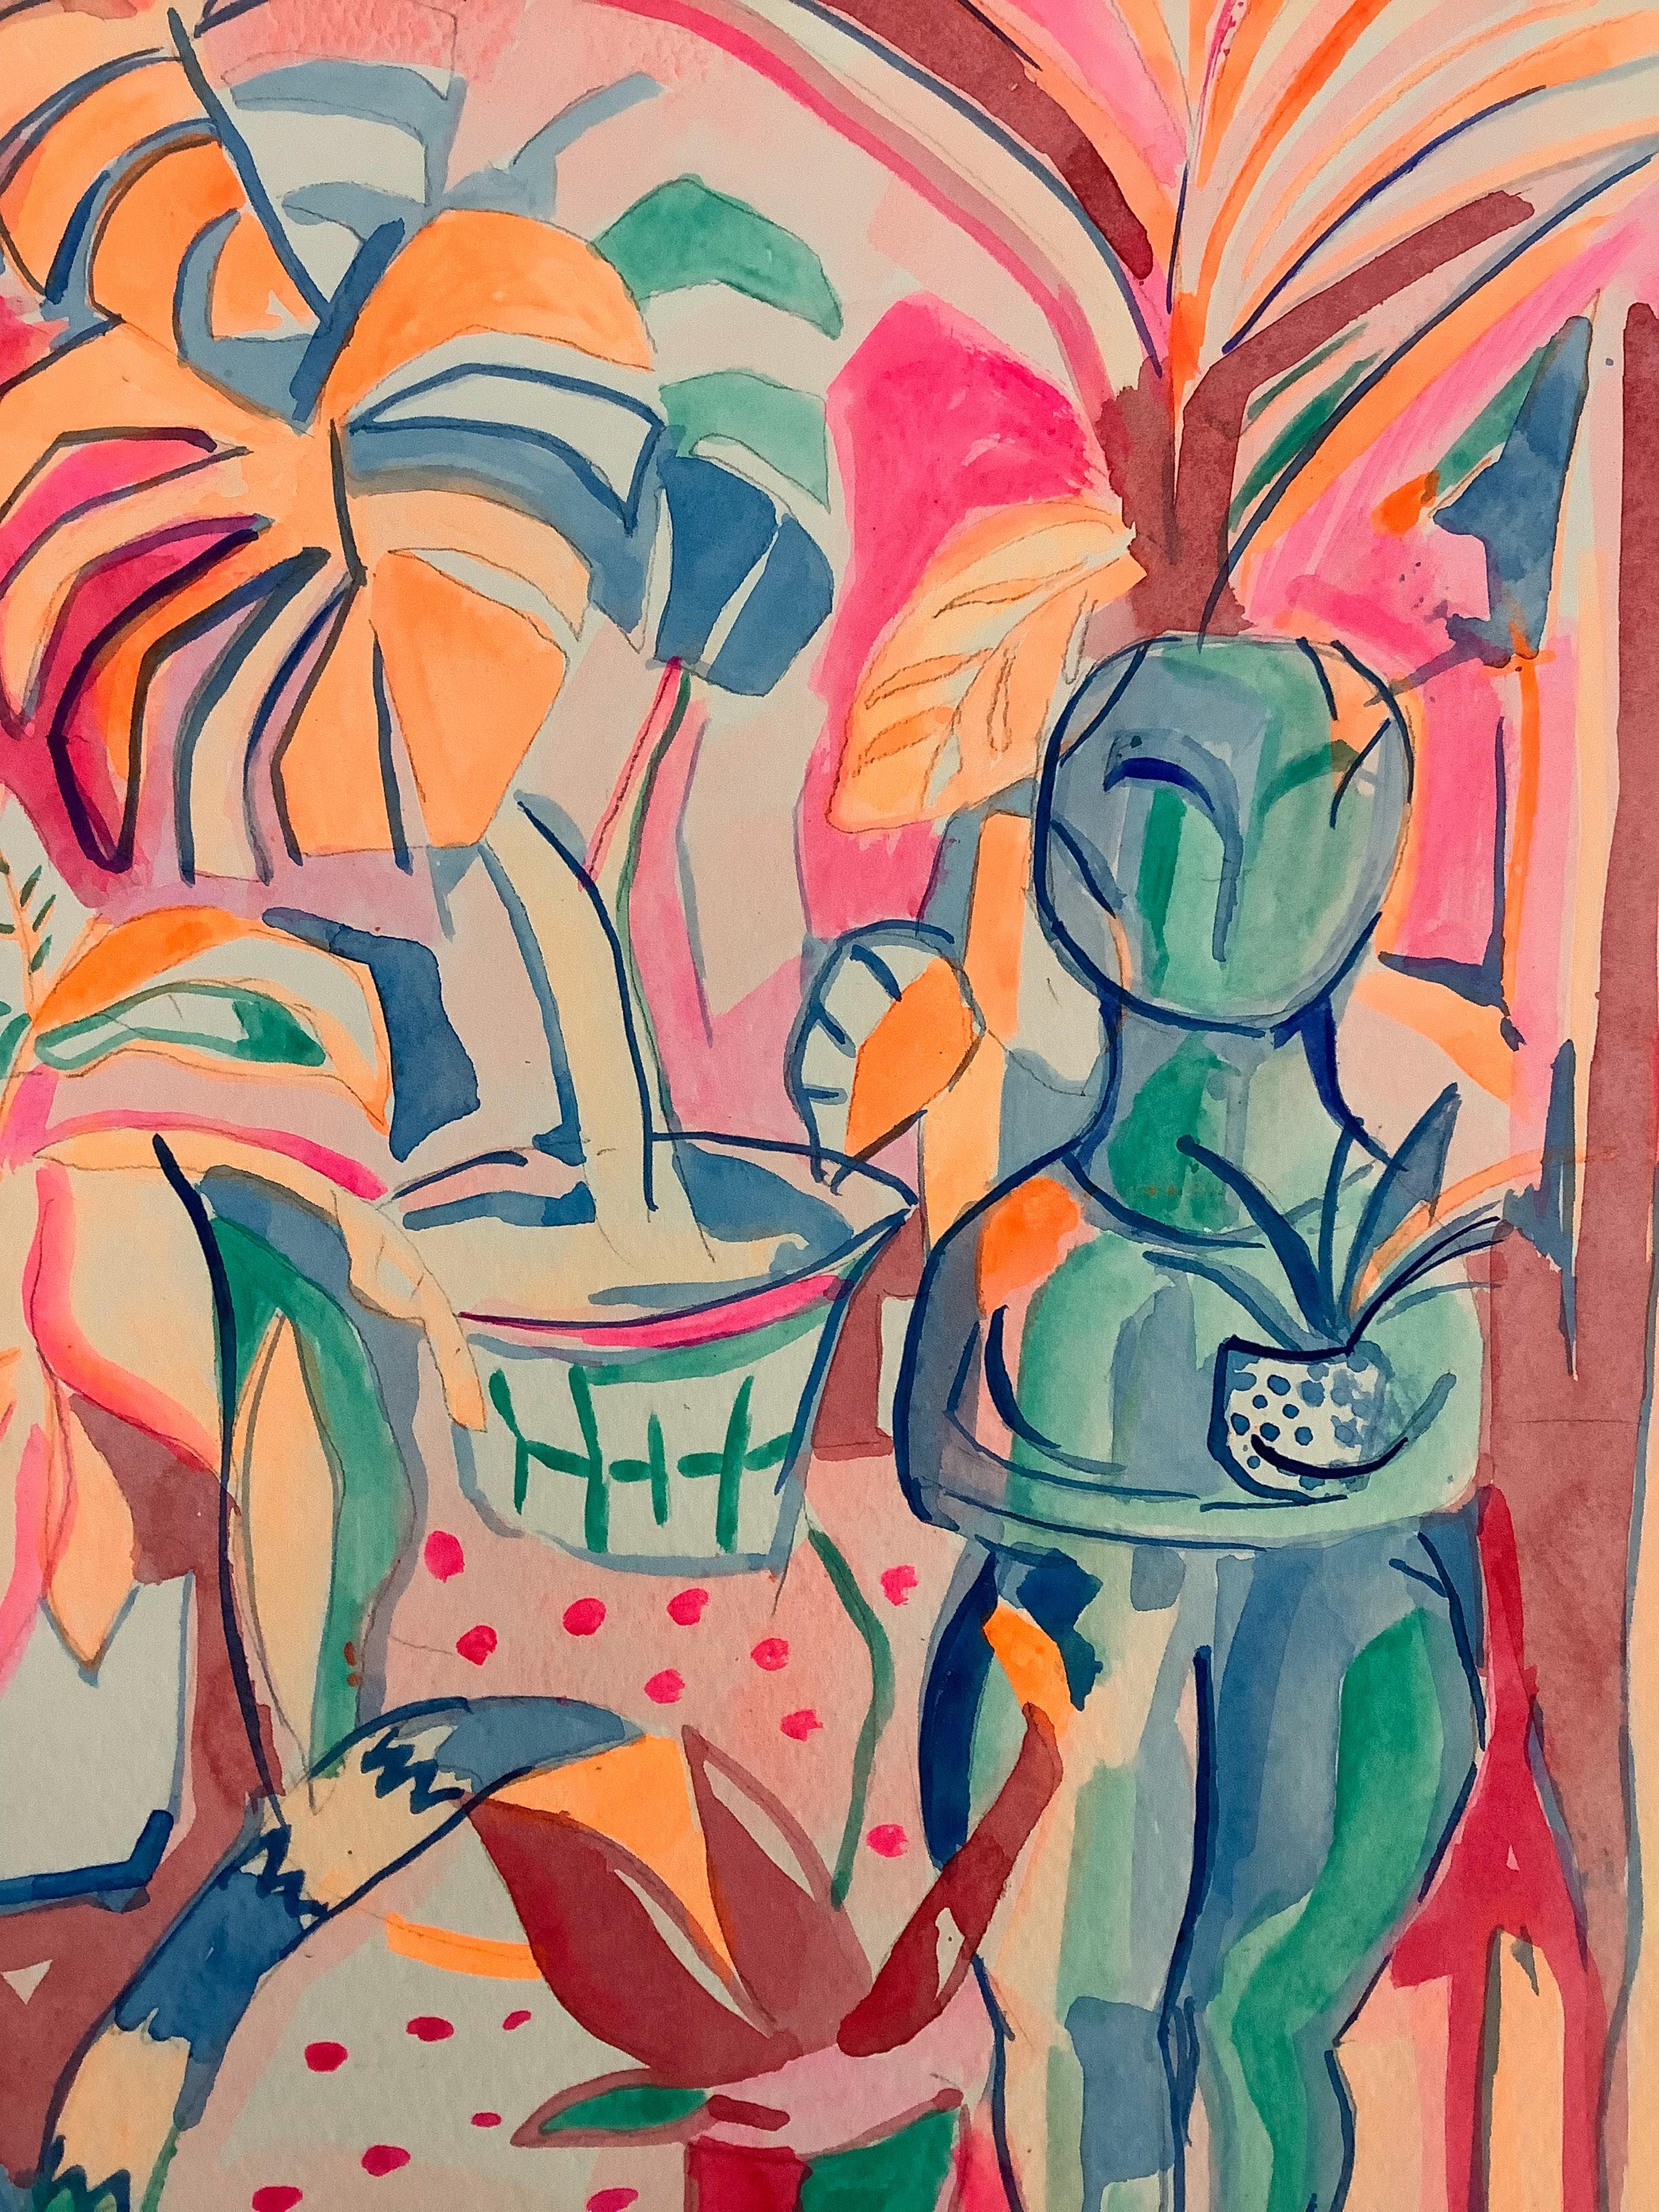 Goddess with plants, Acrylic on watercolour paper, 42x29cm, 2021 - Painting by Emi Avora